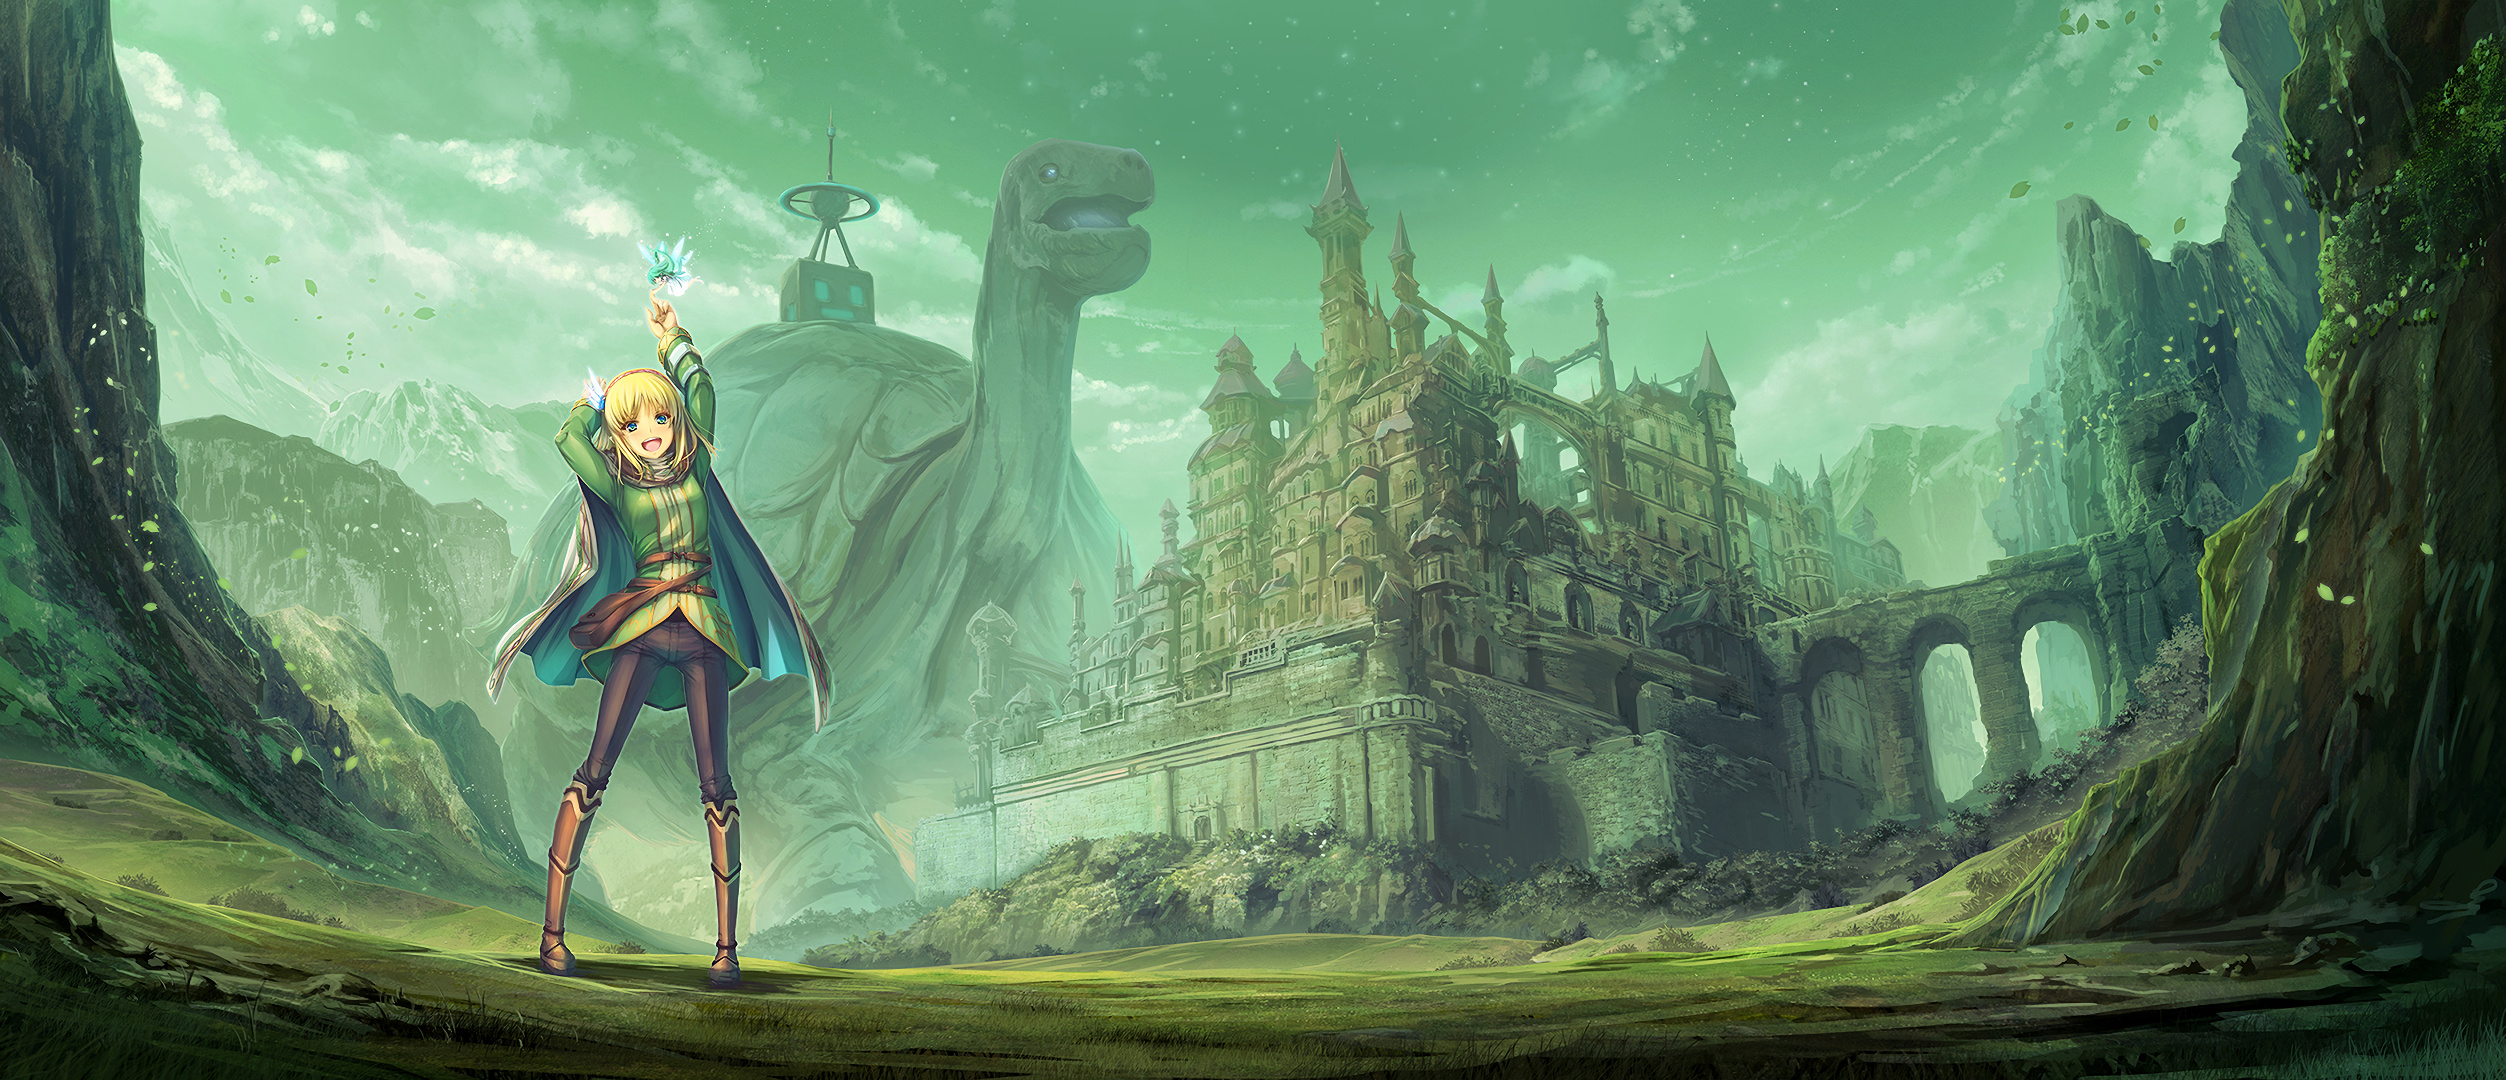 In the Land of Leadale Anime, HD wallpapers, Fantasy world, 2510x1080 Dual Screen Desktop